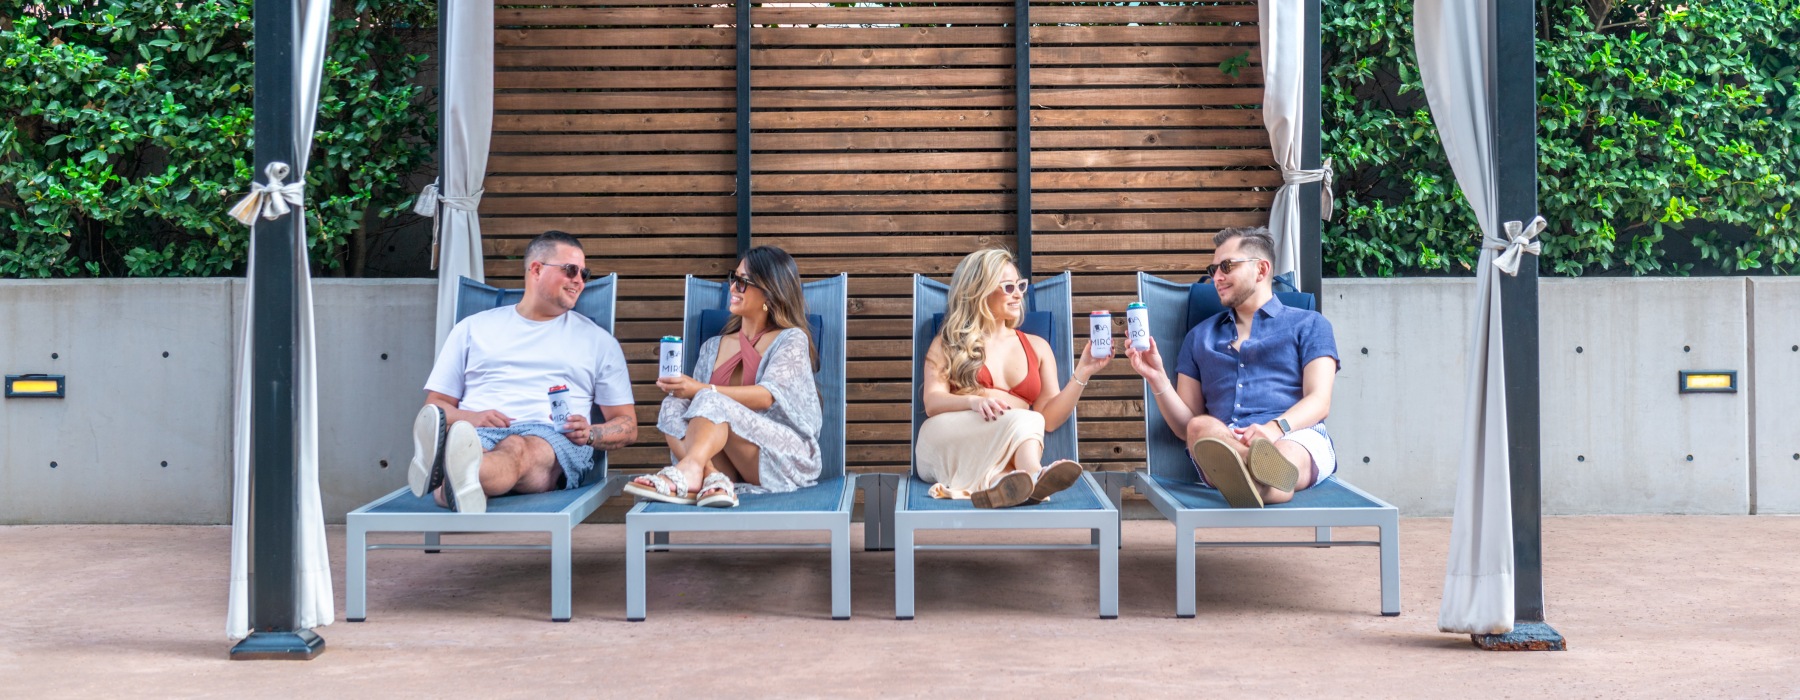 four people sitting on chairs relaxing under a cabana